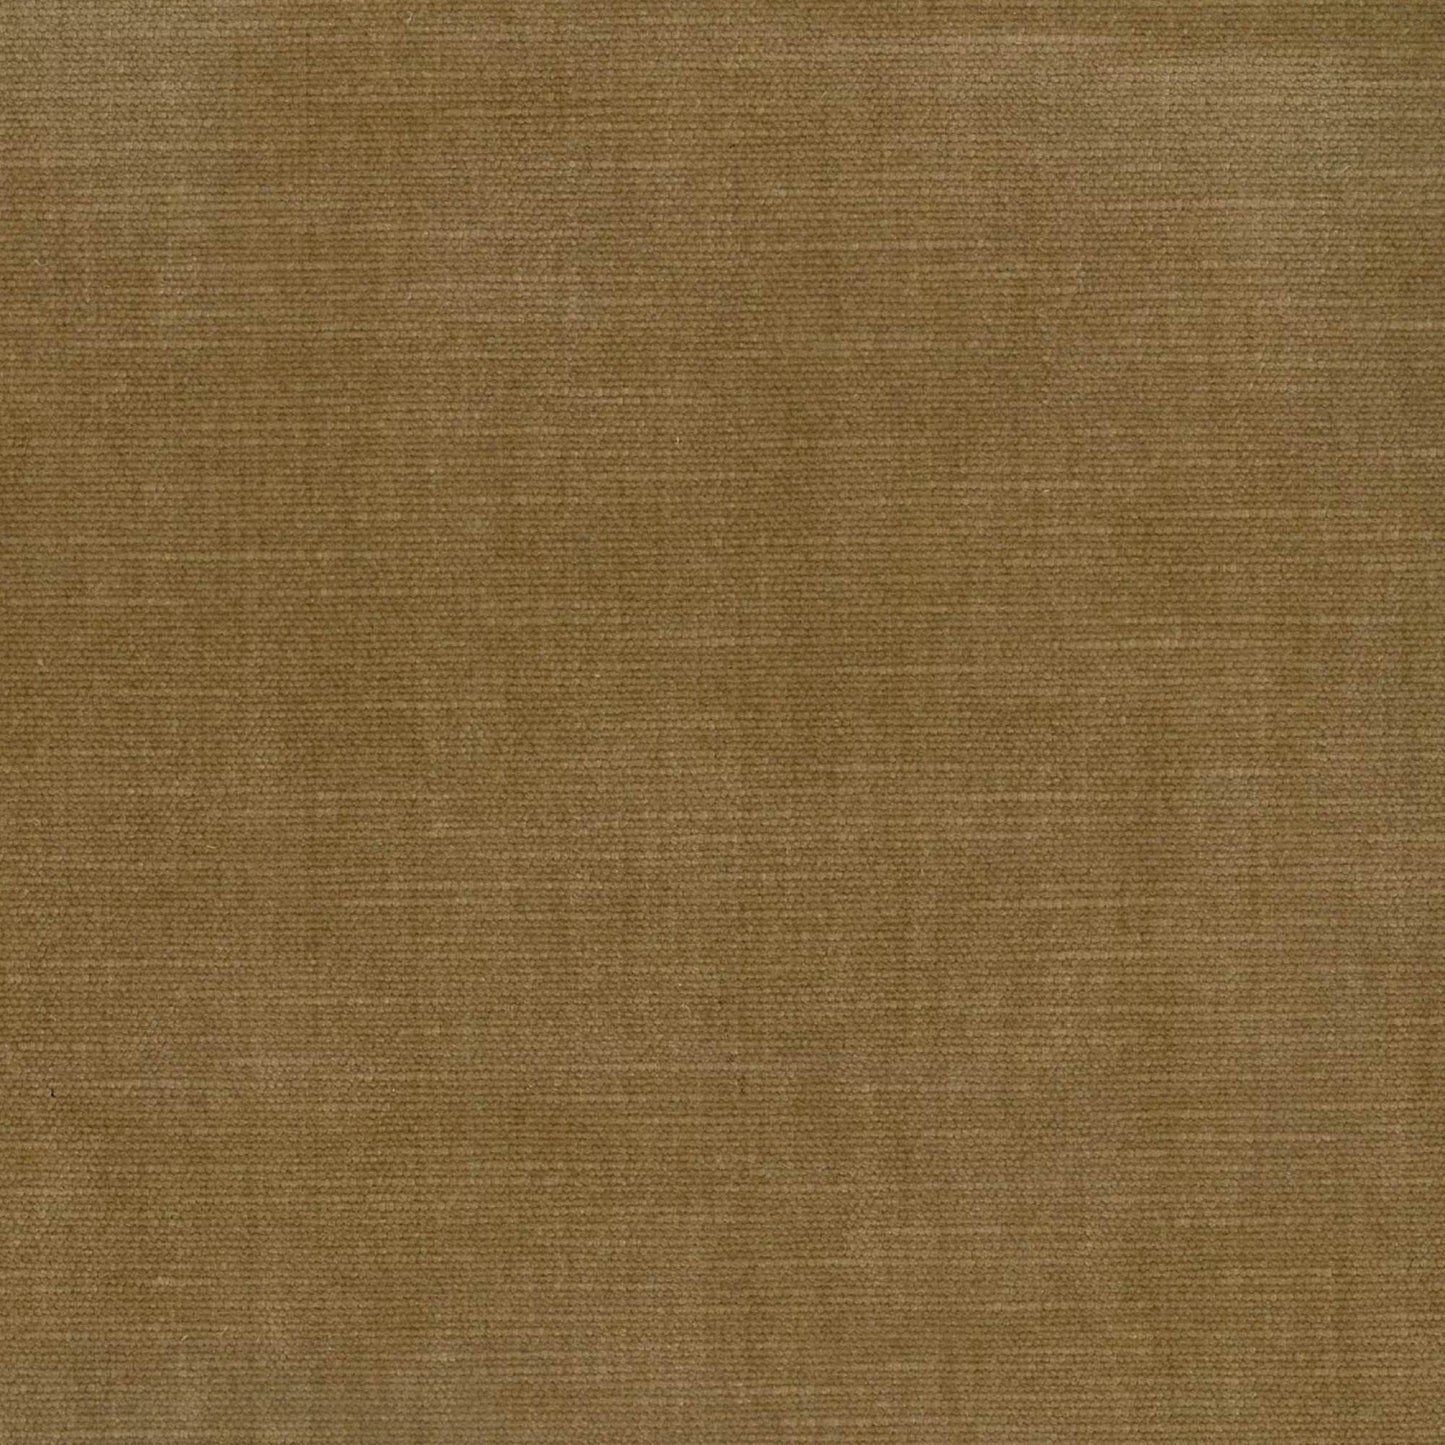 ORLEANS GINGER FABRIC SAMPLE | PREMIUM COLLECTION